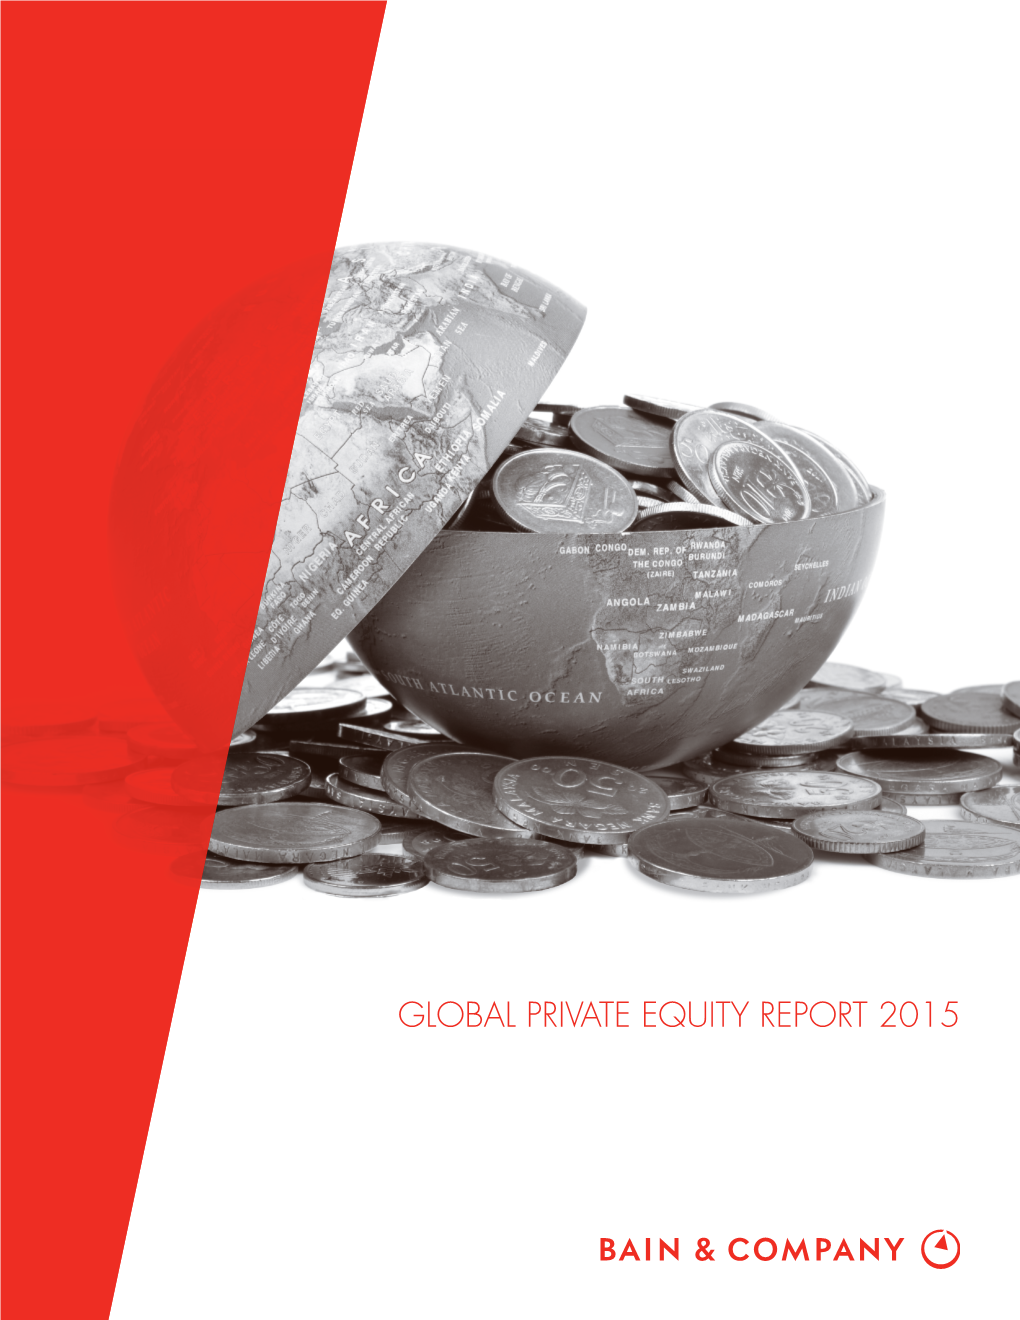 GLOBAL PRIVATE EQUITY REPORT 2015 About Bain & Company’S Private Equity Business